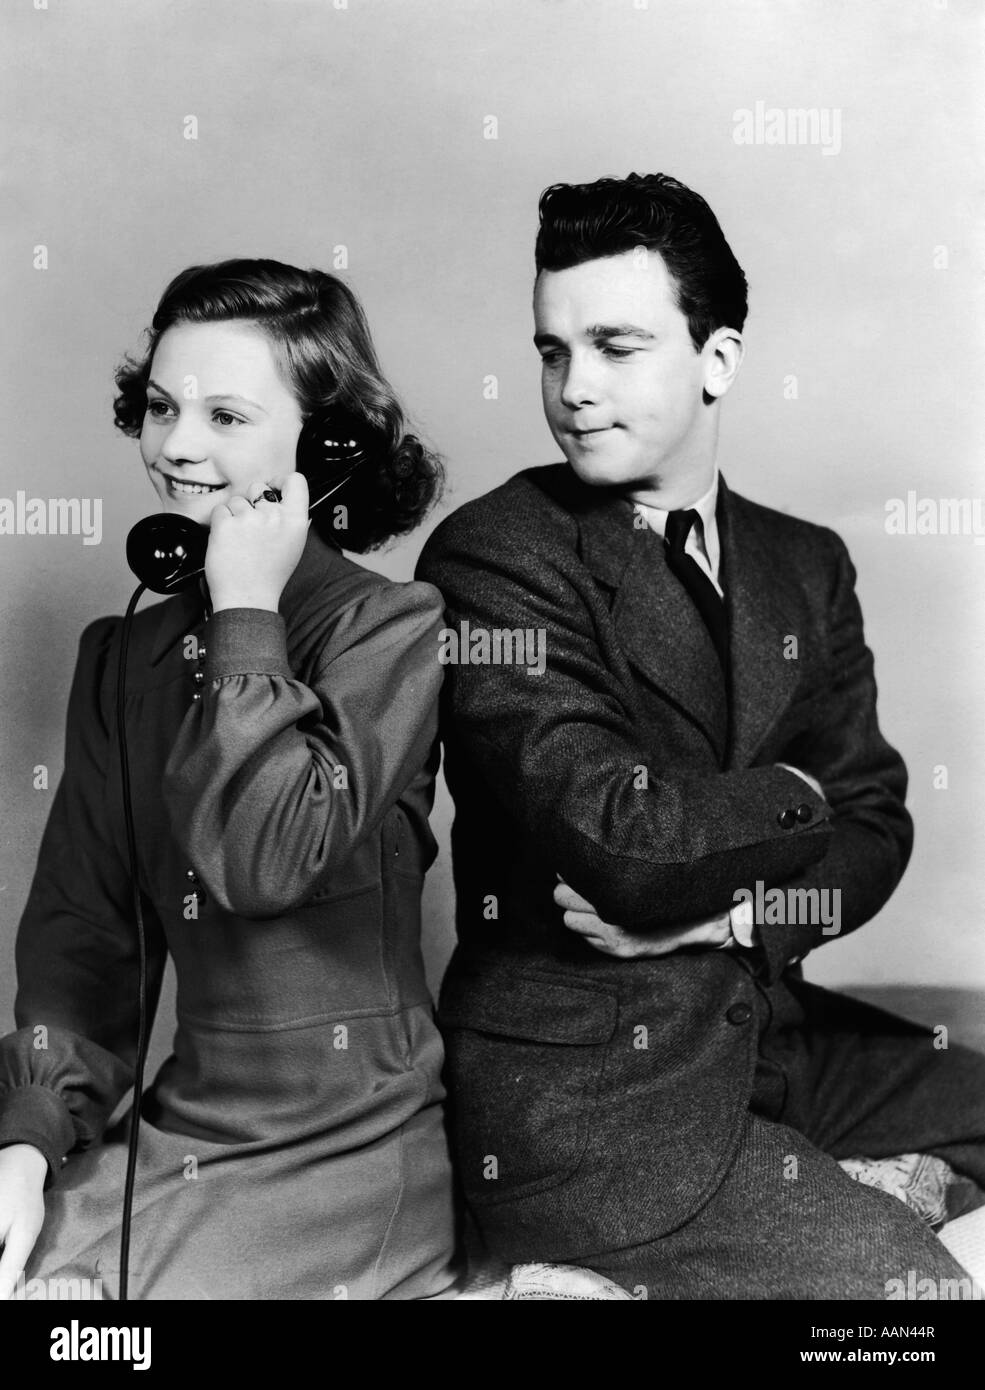 1940s YOUNG COUPLE GIRL TALKING ON TELEPHONE BOY ARMS CROSSED LOOKS ANNOYED Stock Photo